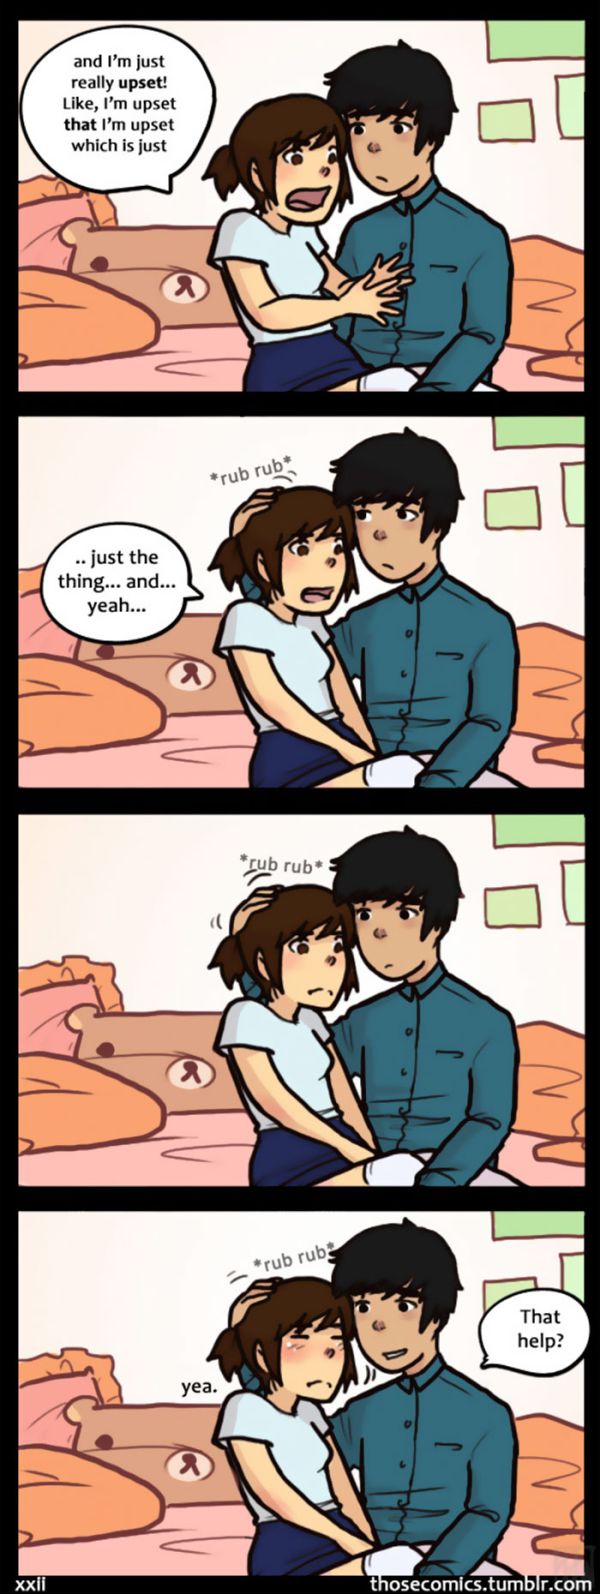 Comics About Couple Life Show Happiness Is In The Little Things